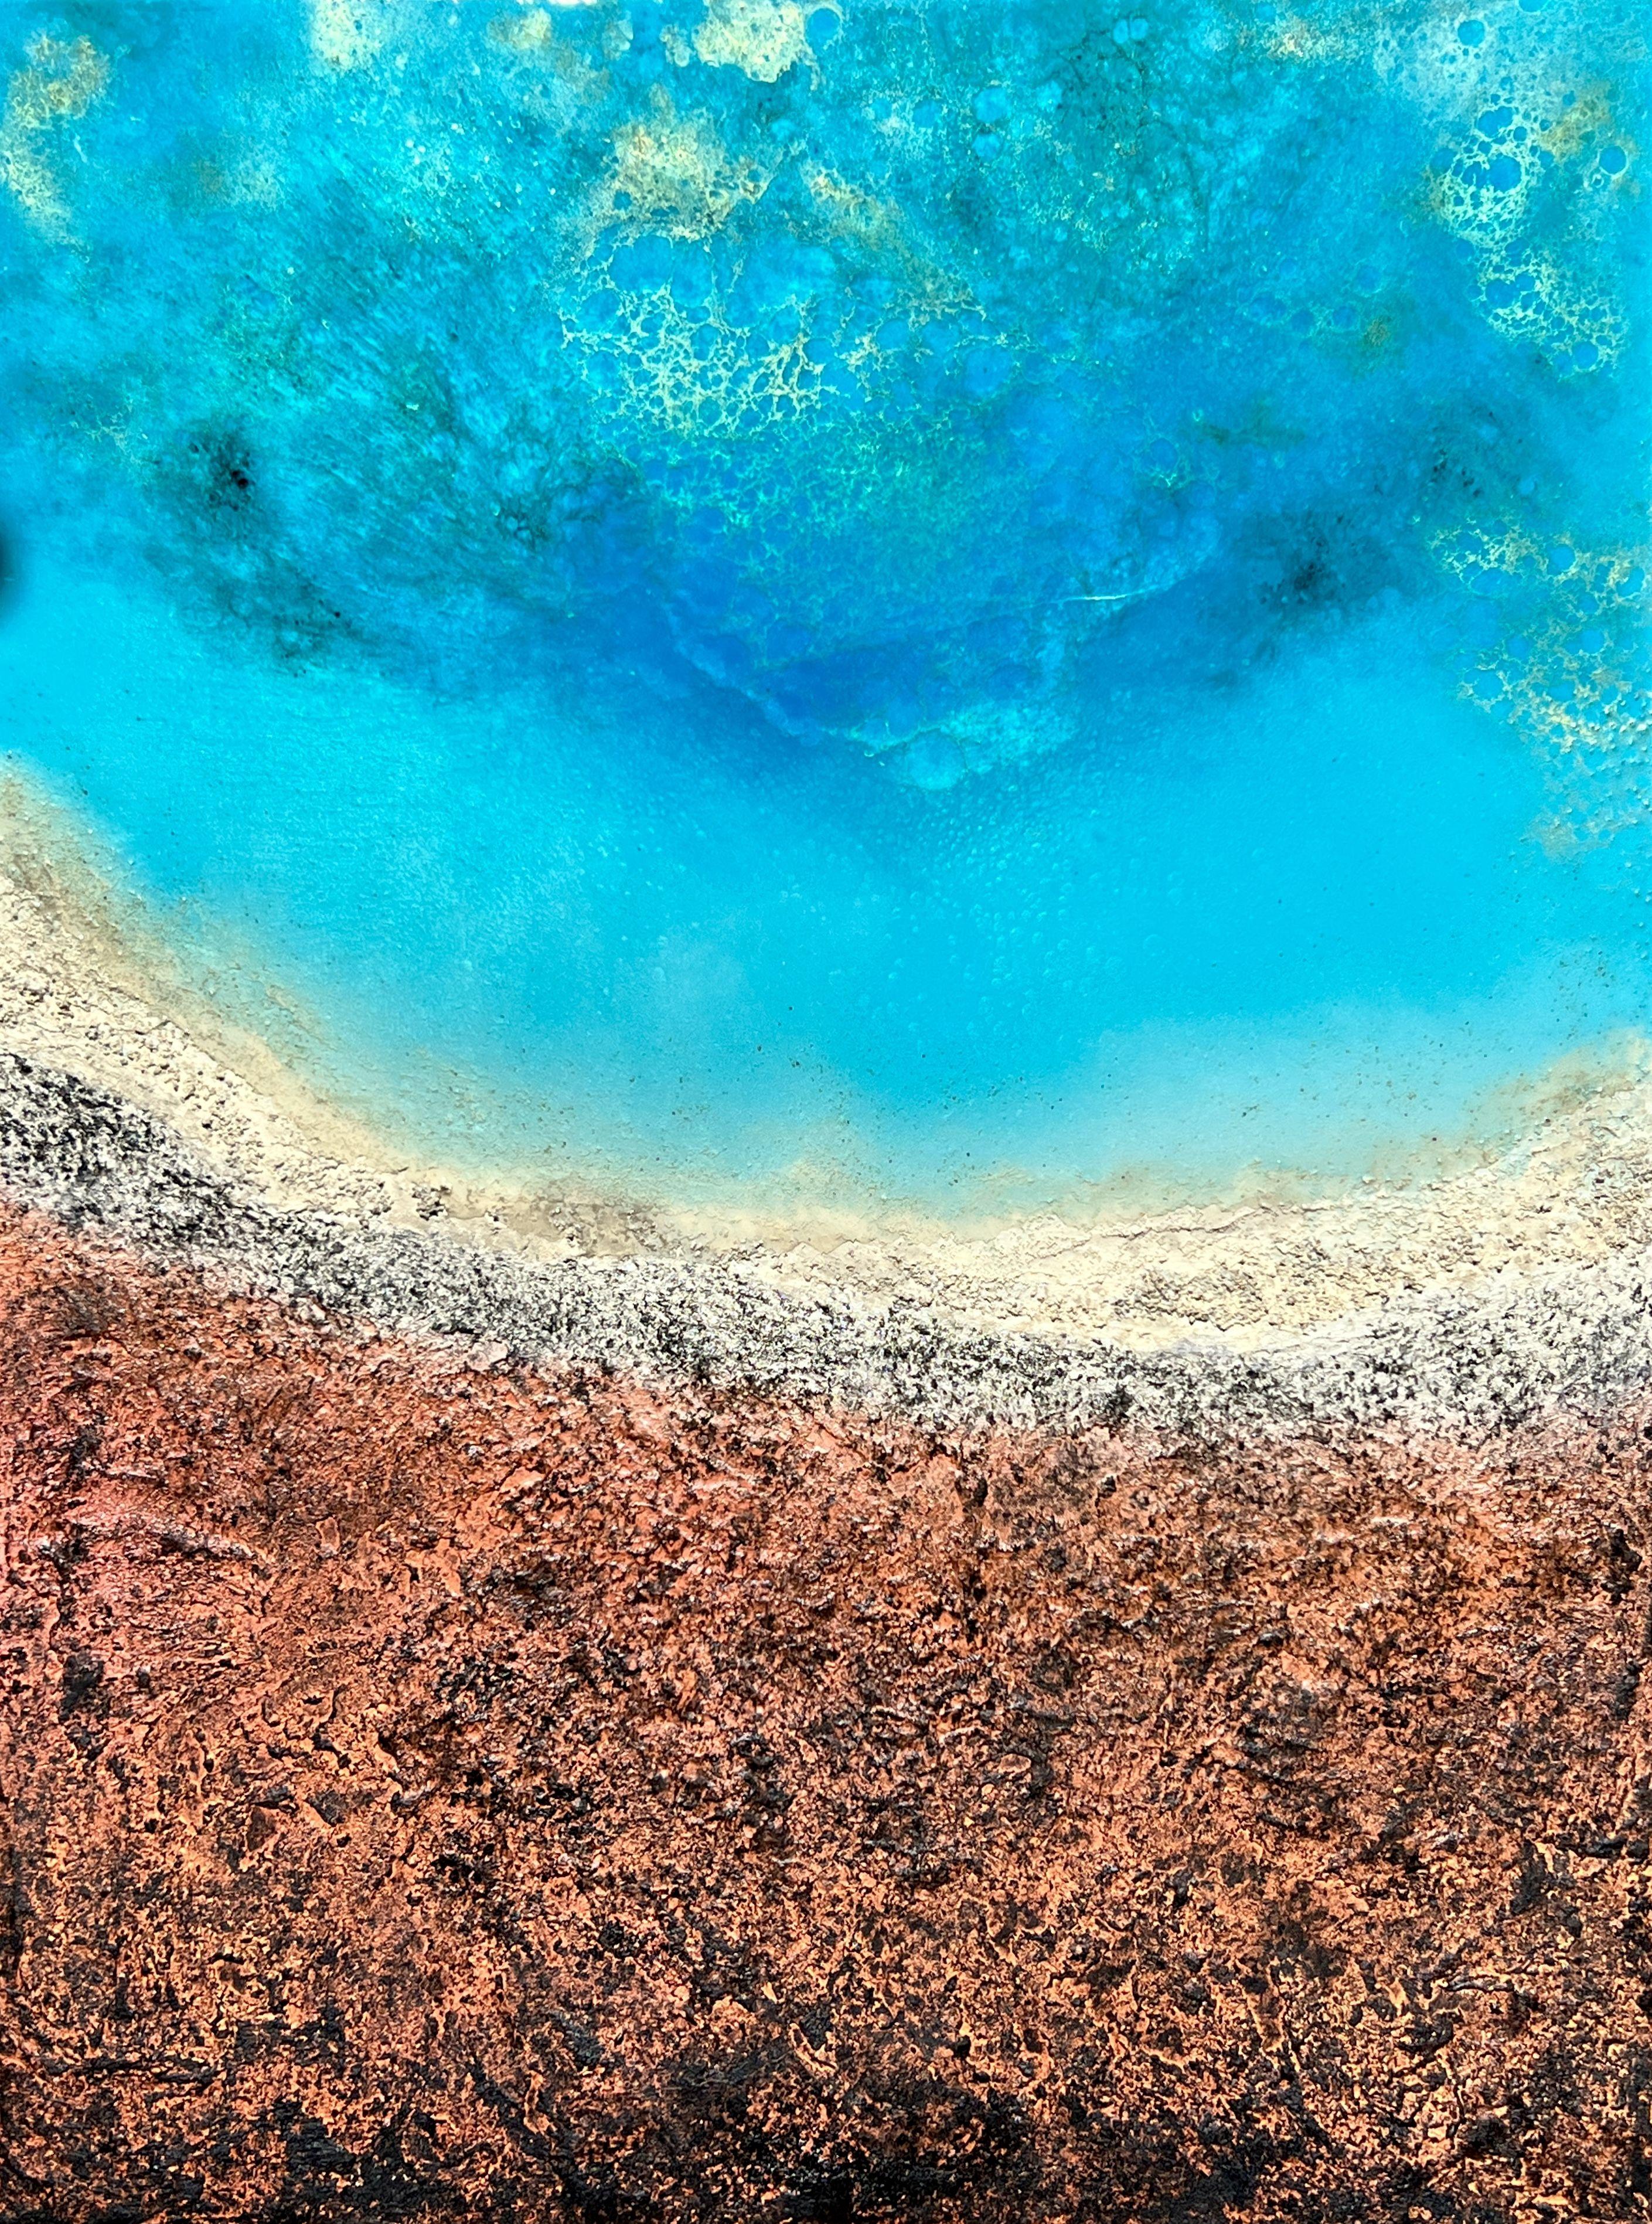 Unique original aerial ocean painting inspired by aerial view of the spectacular Shark Bay, Australia  Different shades of blue, turquoise, teal, aqua, beige, black and gold  This painting does not need to be framed, the painted image is extended